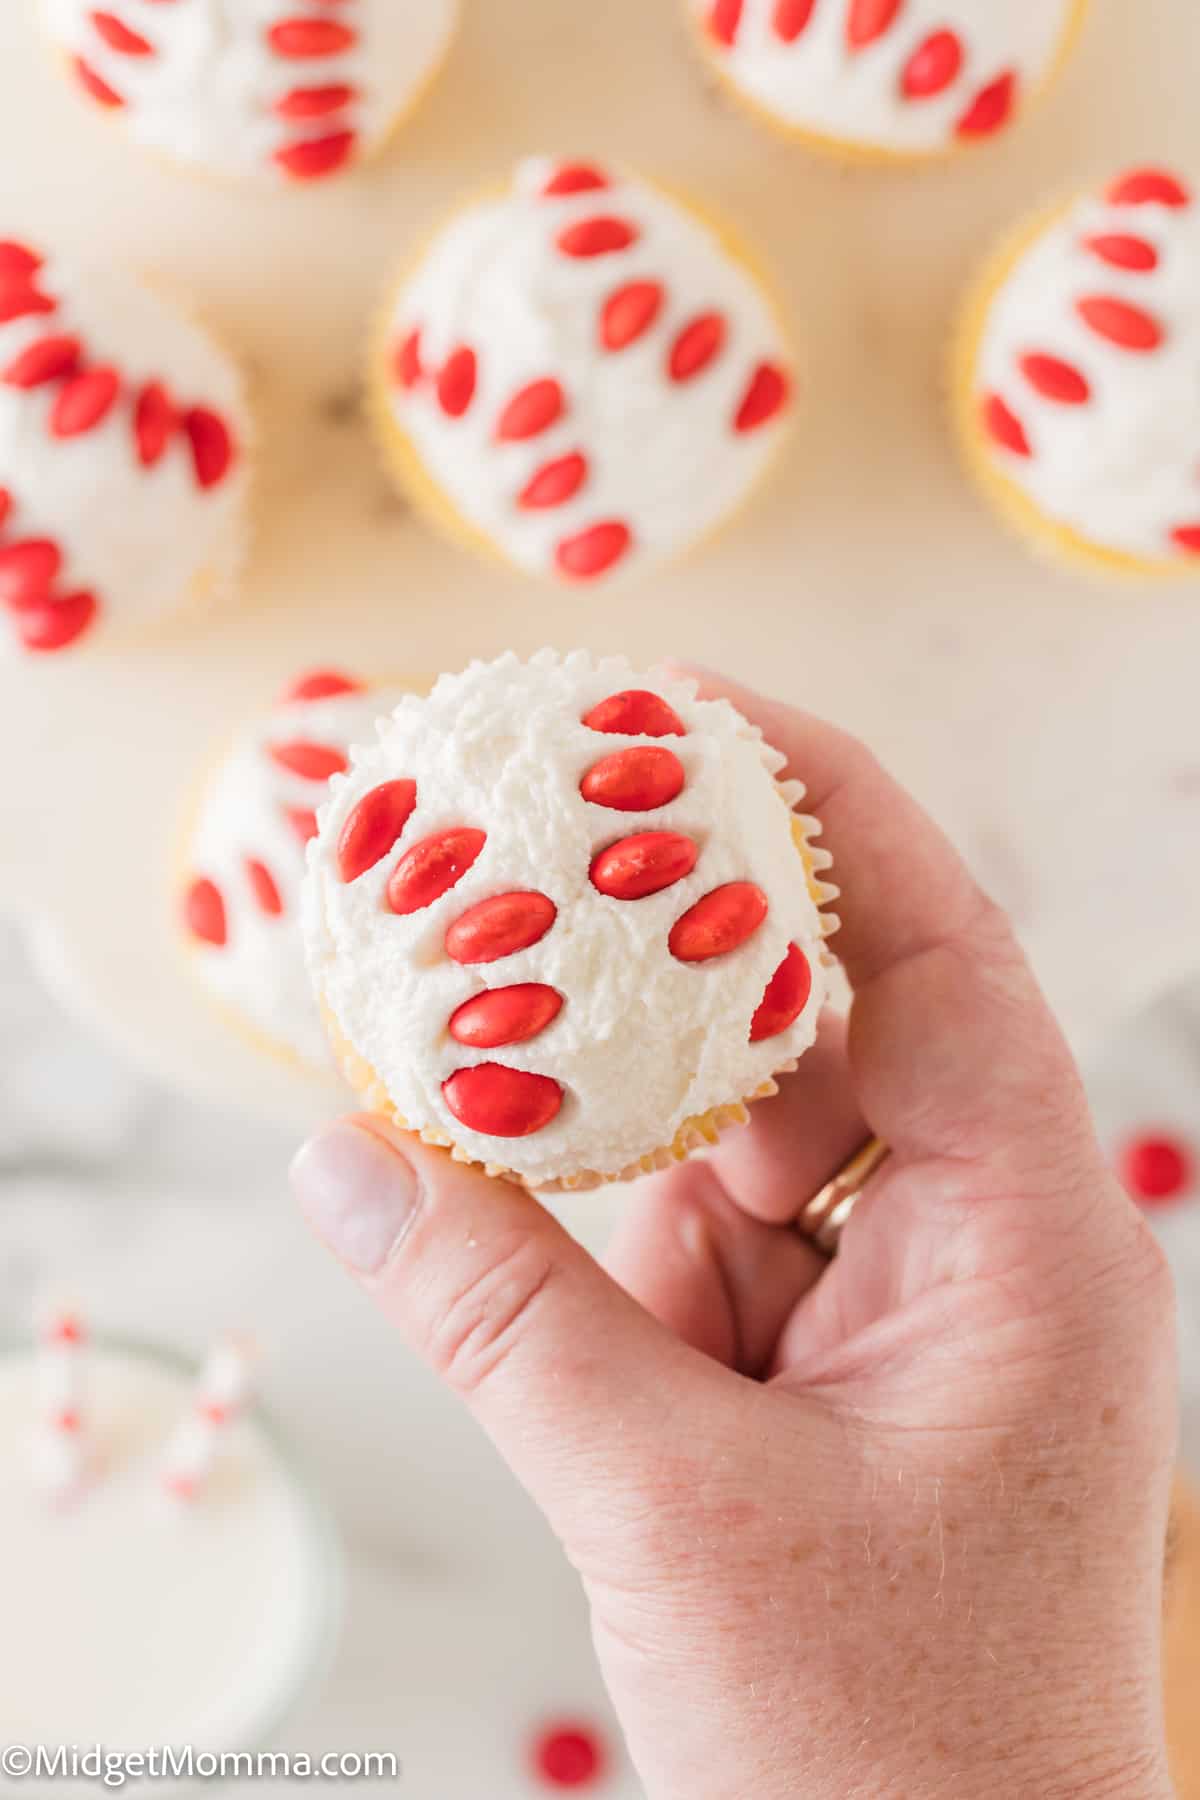 A hand holding a cupcake with red and white M&Ms.